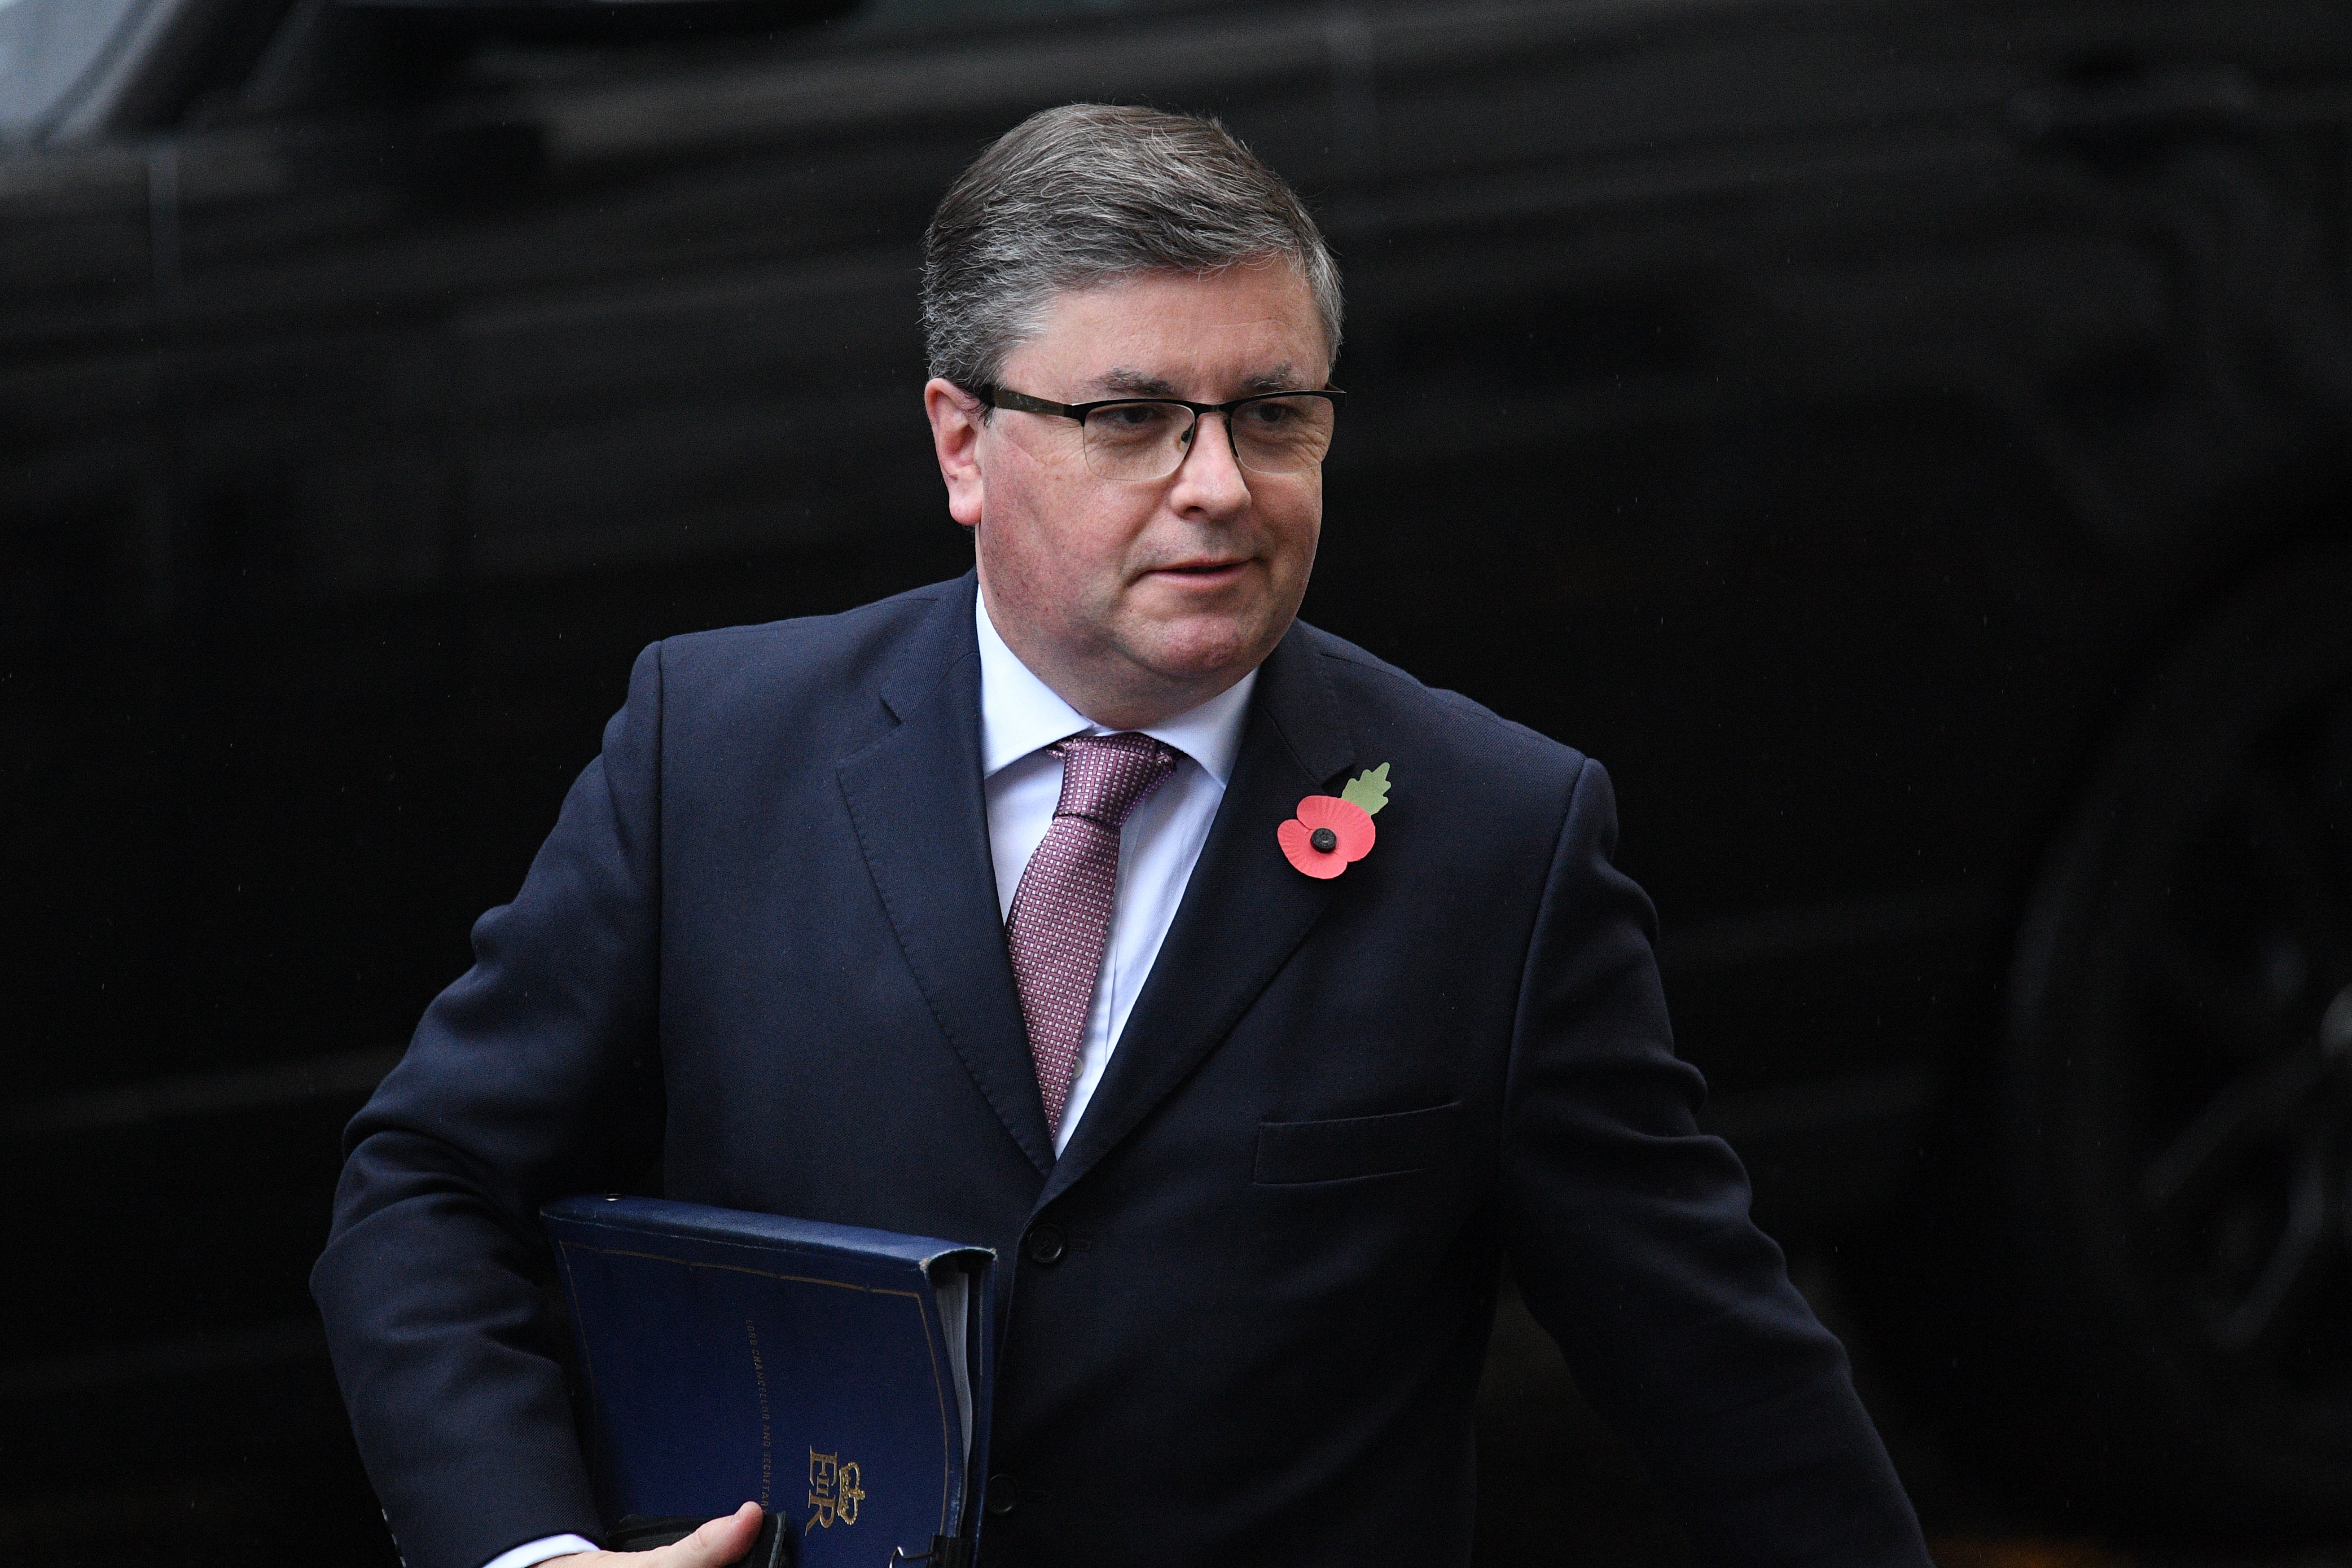 Justice secretary Robert Buckland claimed that the idea of the rule of law was being used by critics of the government to ‘weaponise the courts against political decision making’